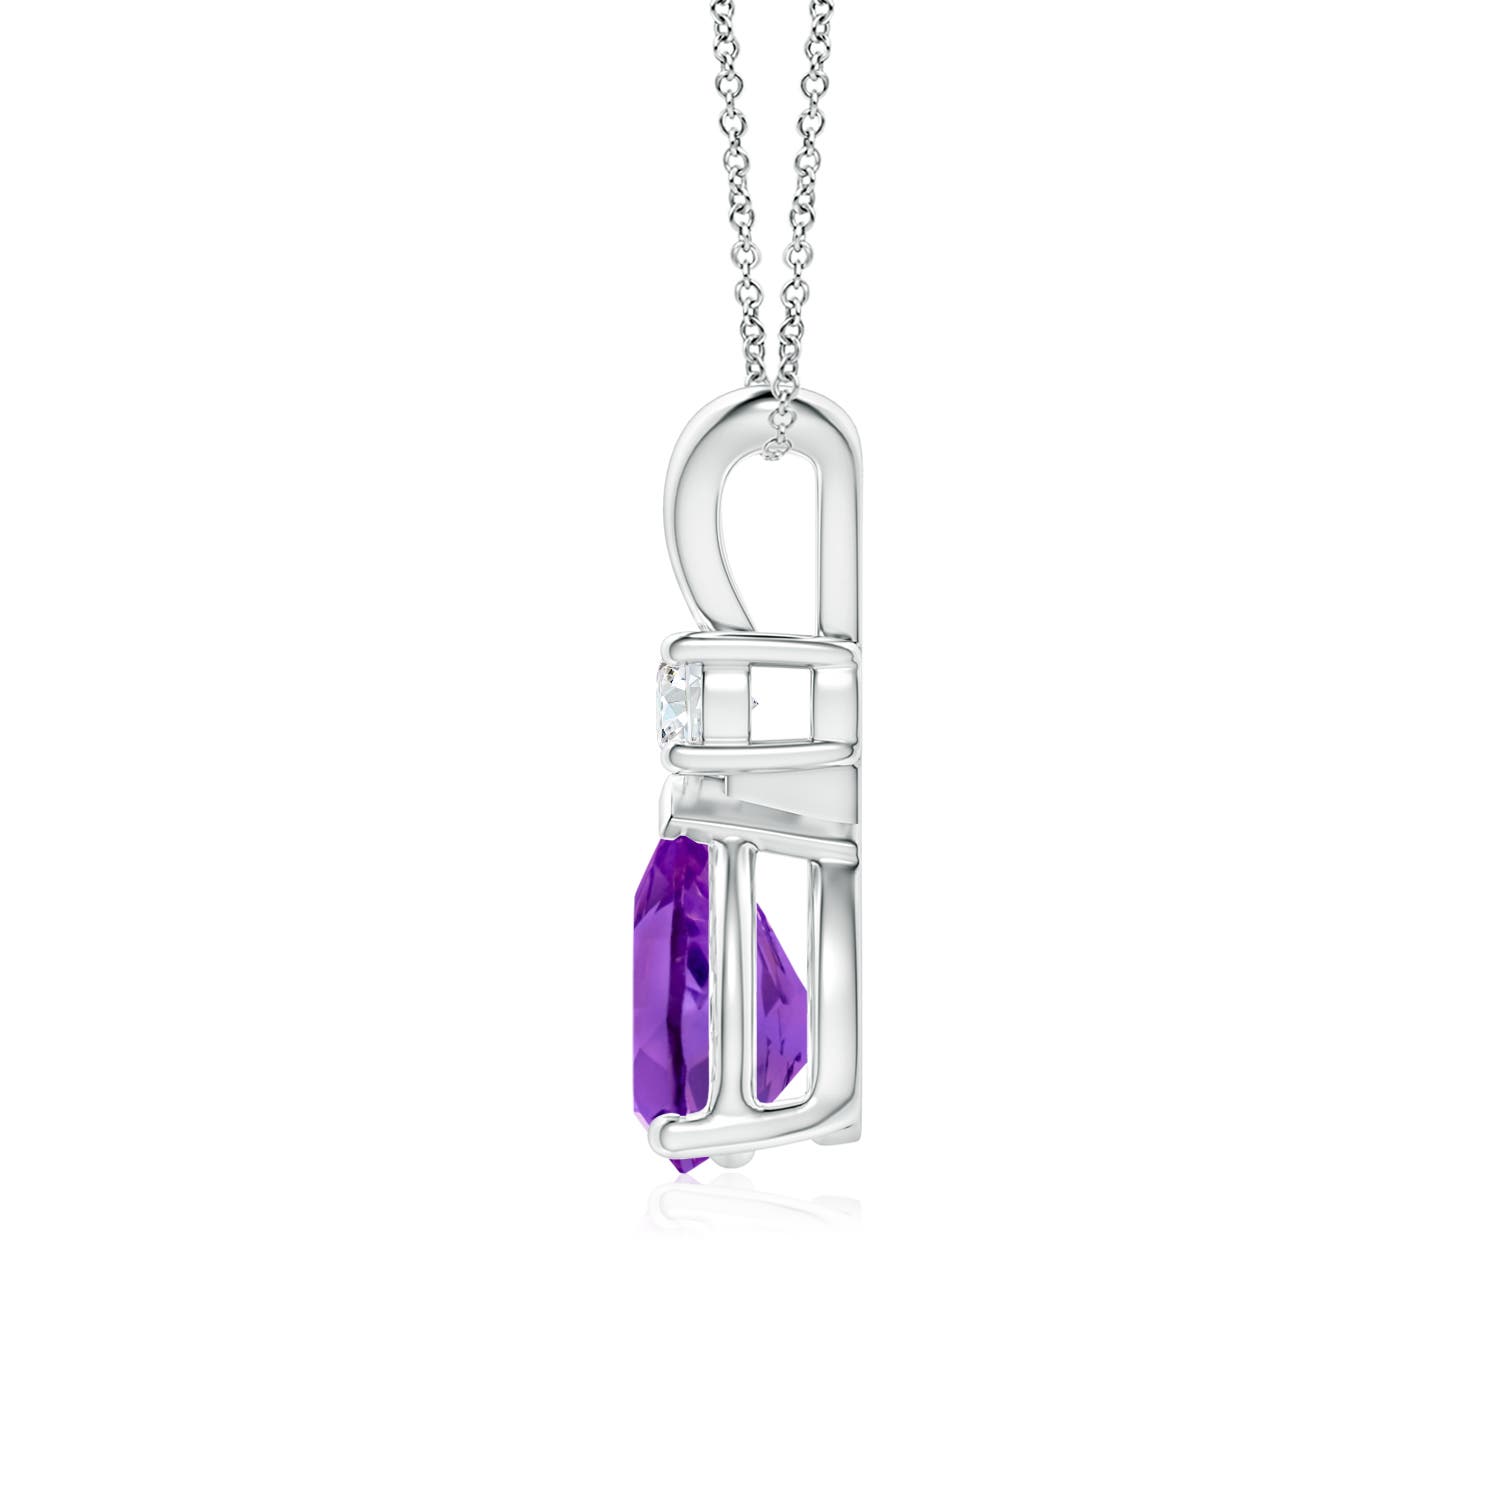 AAA - Amethyst / 1.11 CT / 14 KT White Gold